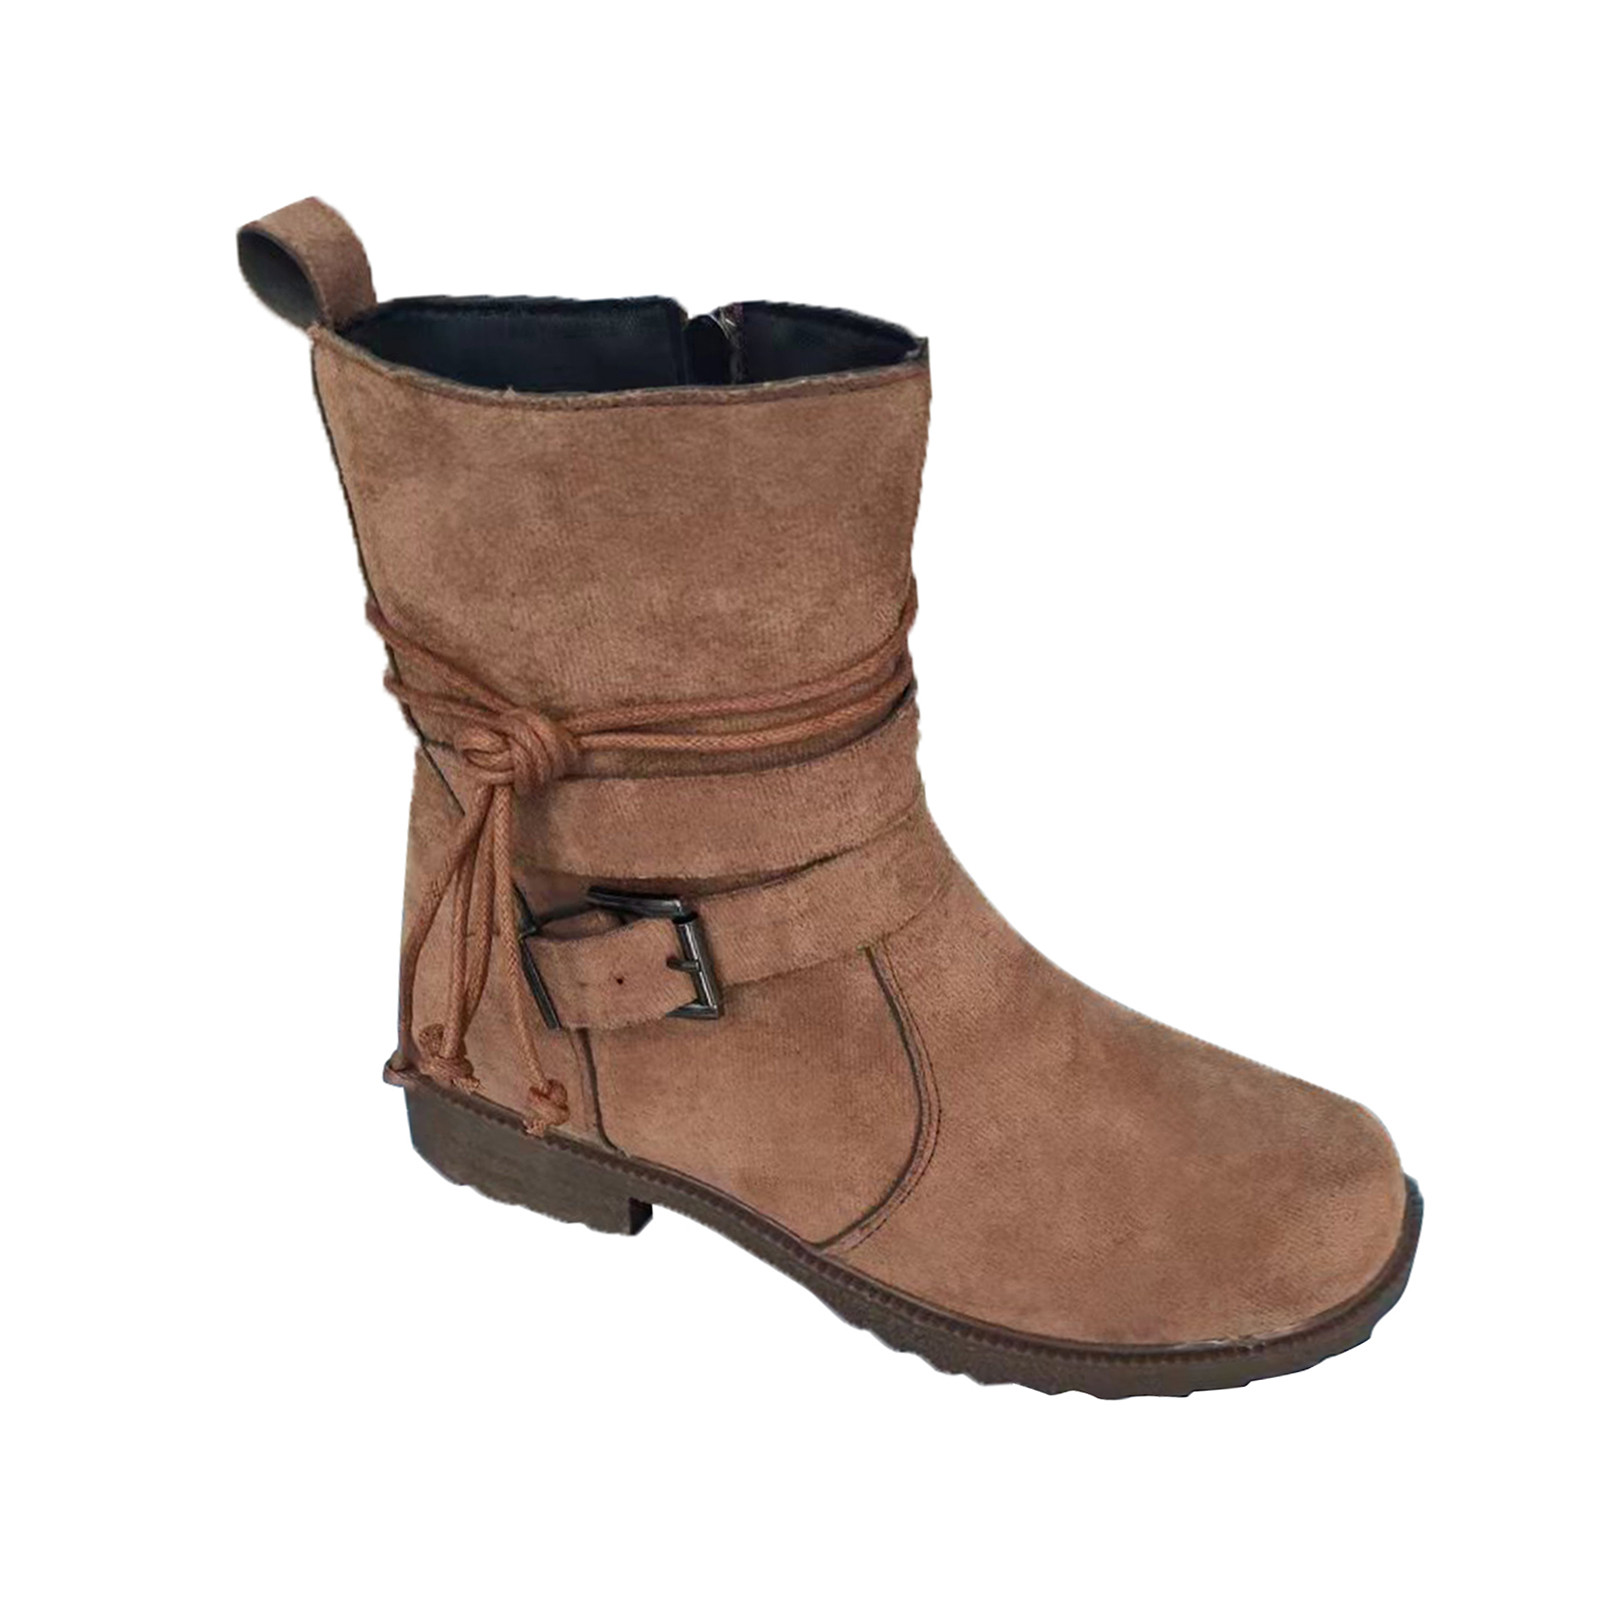 KaLI_store Hiking Boots Women Women Chelsea Boots Buckle Ankle Boots ...